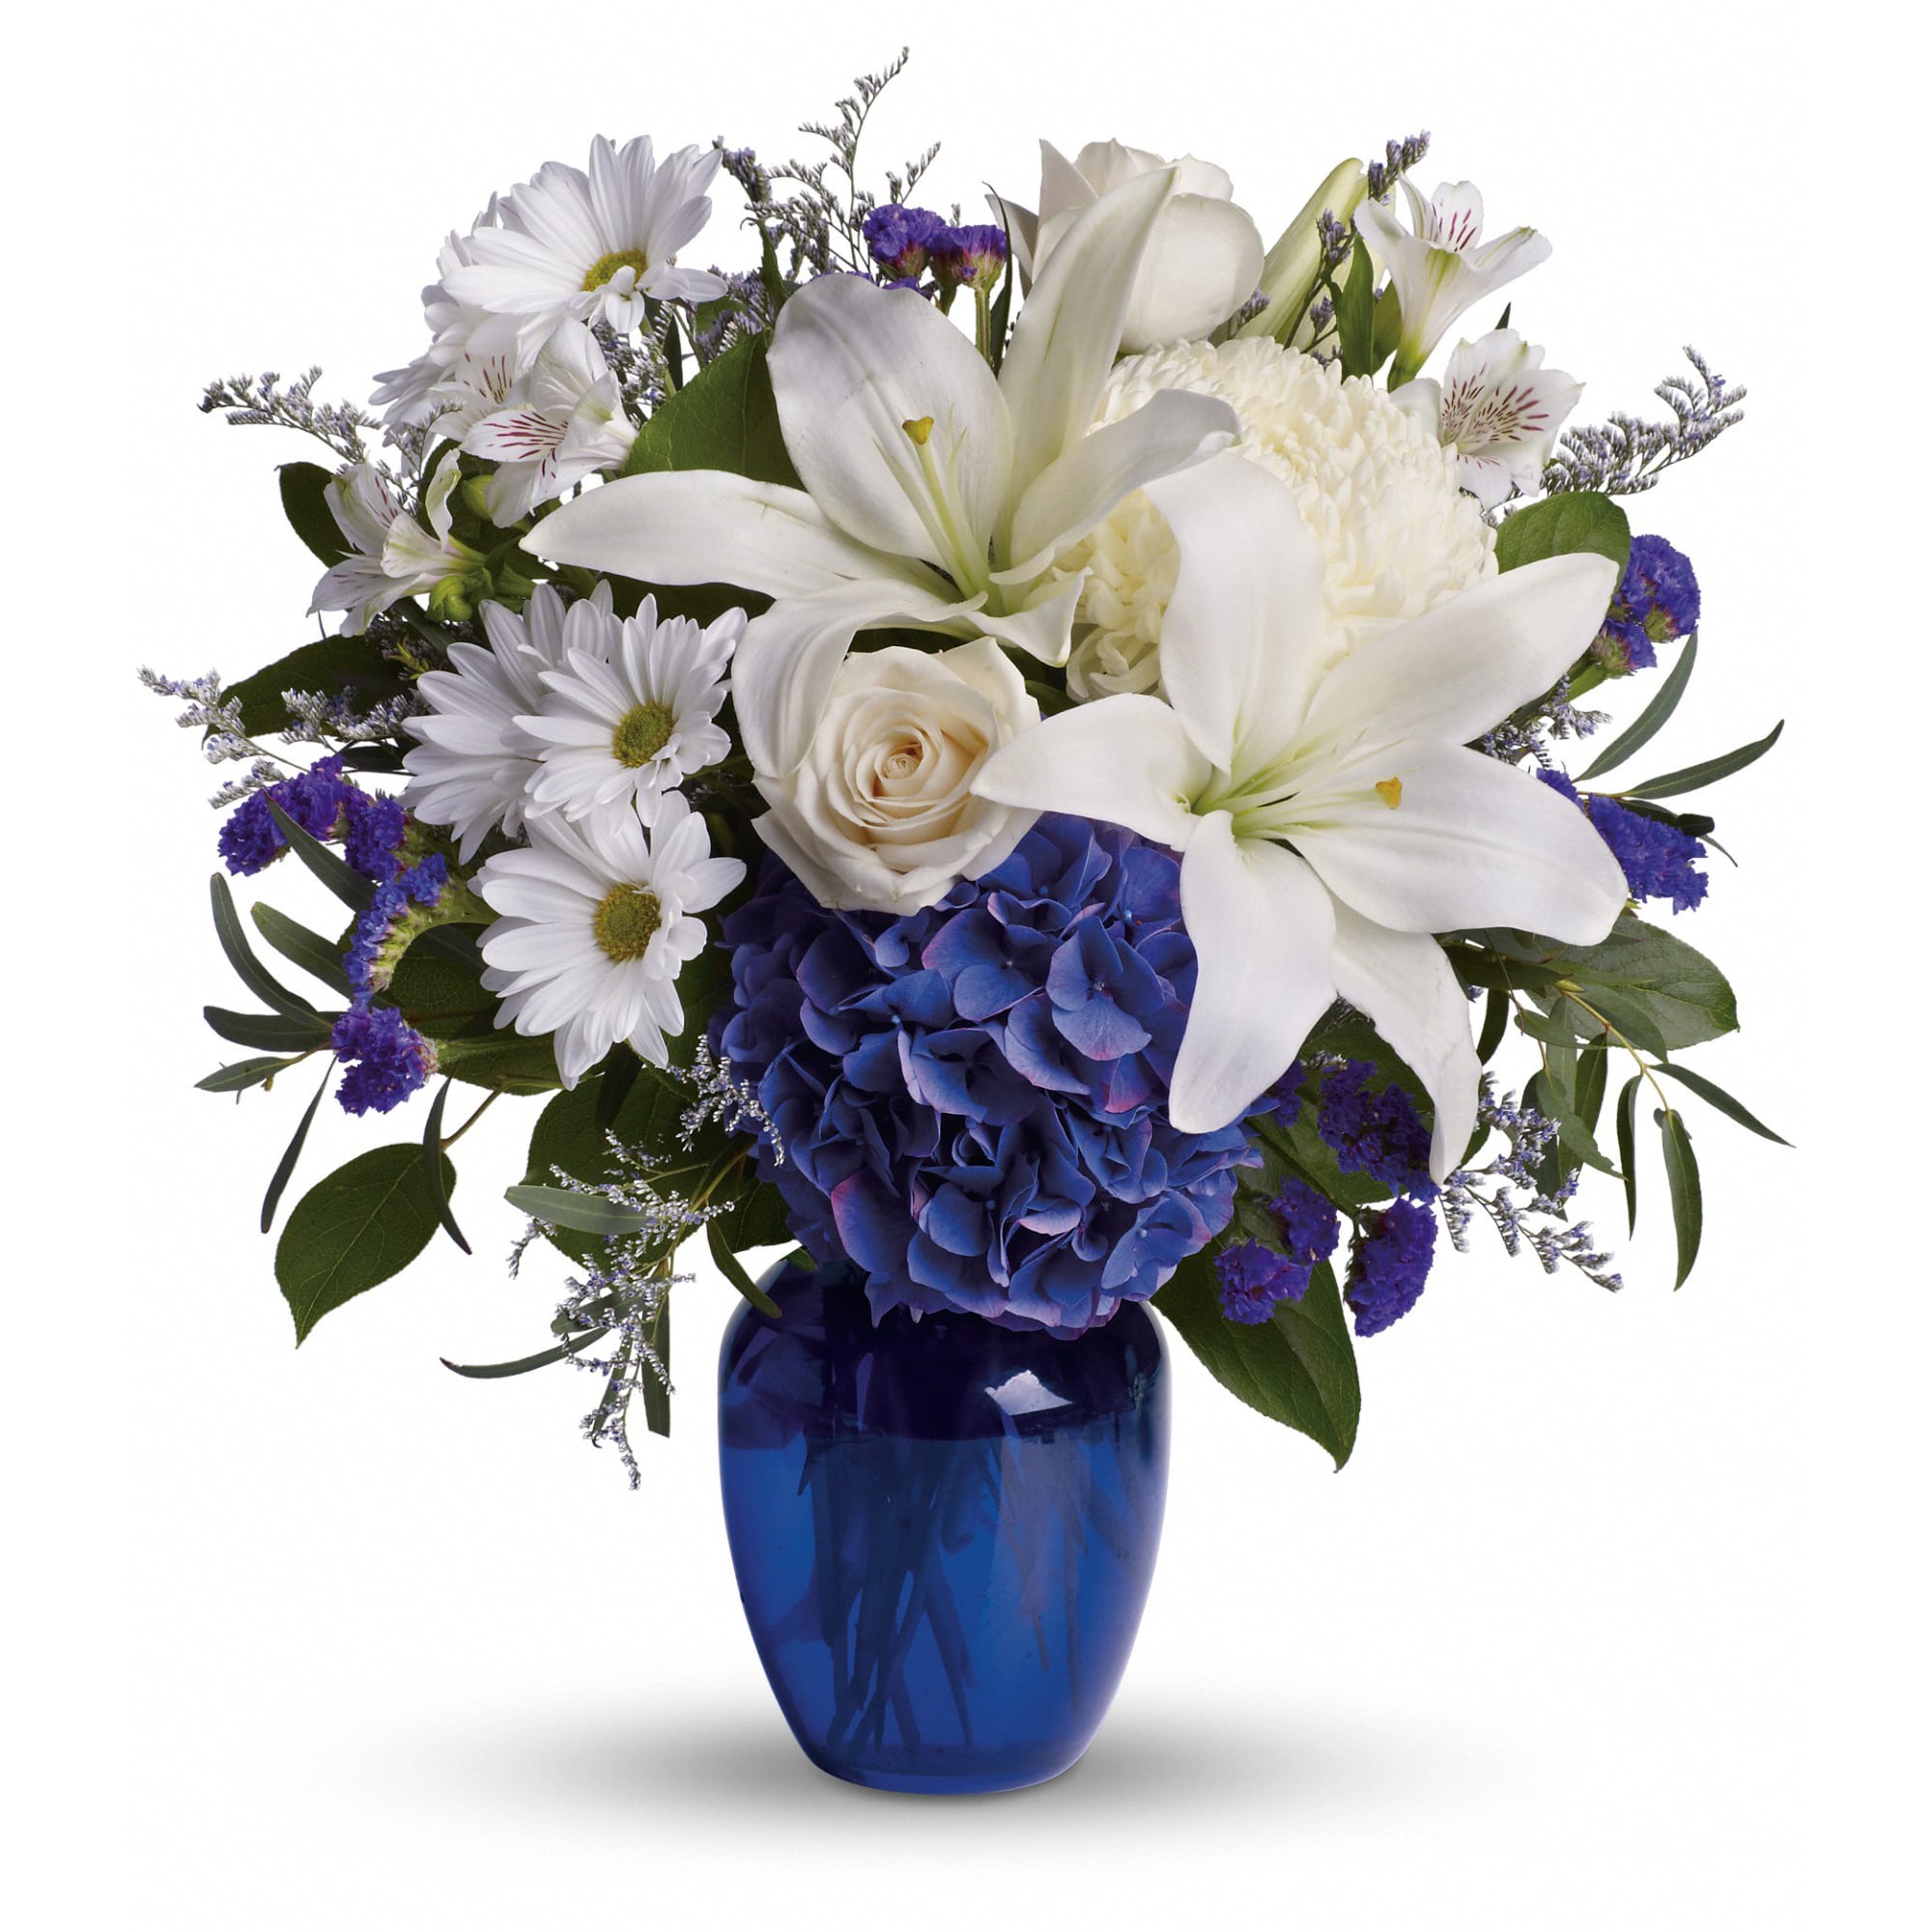 Blue Smoke - Preserved and everlasting flowers – Office Flower